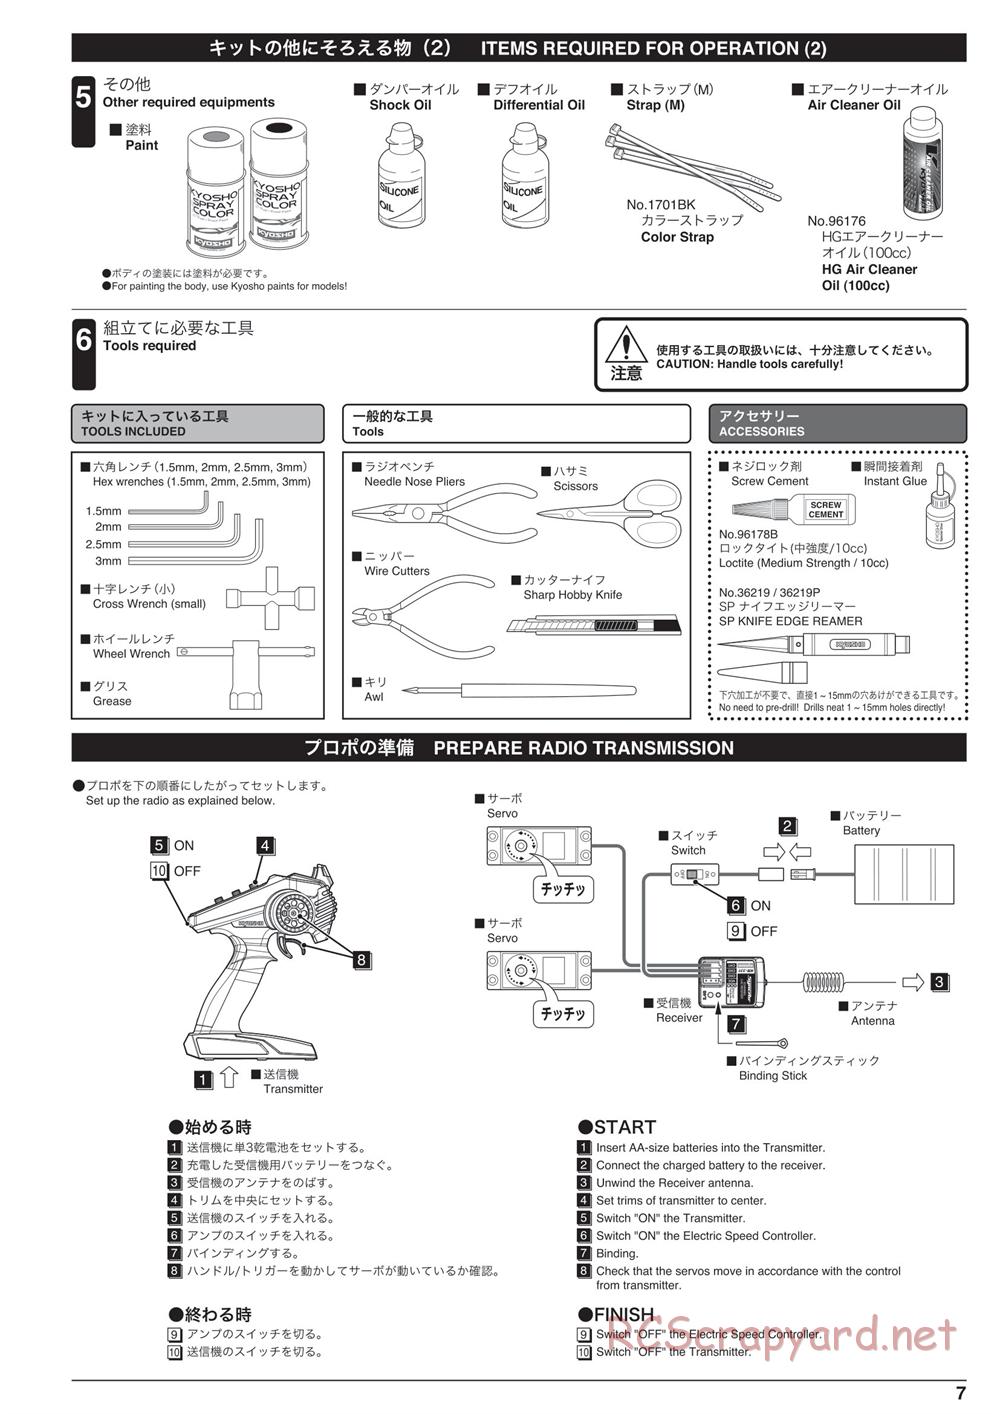 Kyosho - Inferno MP10 - Manual - Page 7